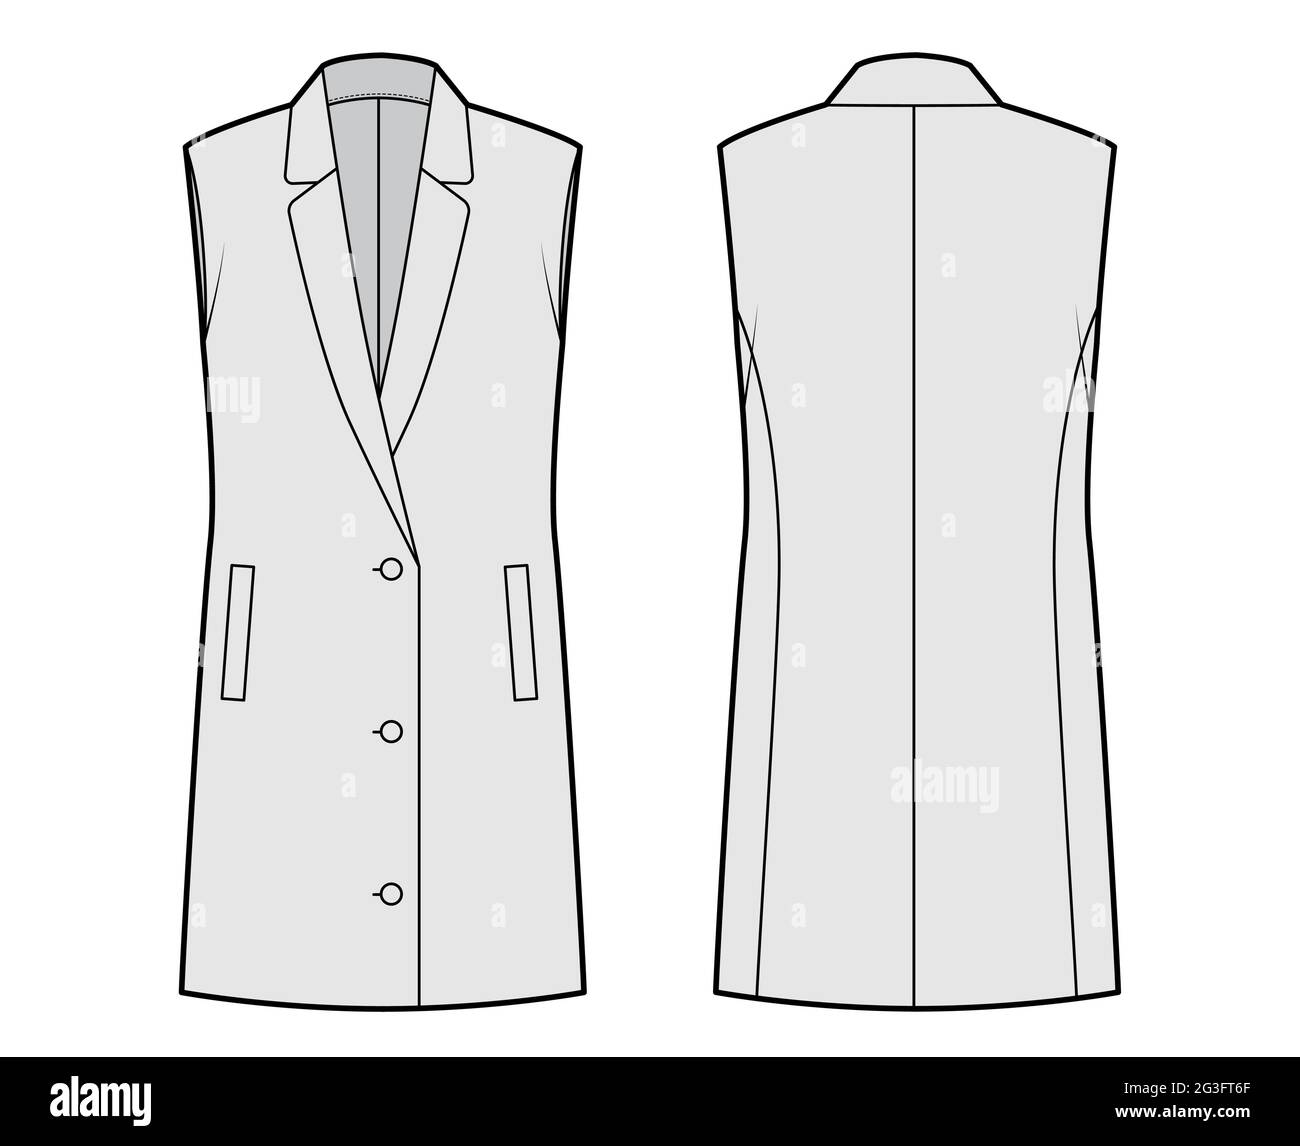 Sleeveless jacket lapelled vest waistcoat technical fashion illustration with button-up closure, pockets, oversized. Flat template front, back, grey color style. Women, men unisex top CAD mockup Stock Vector